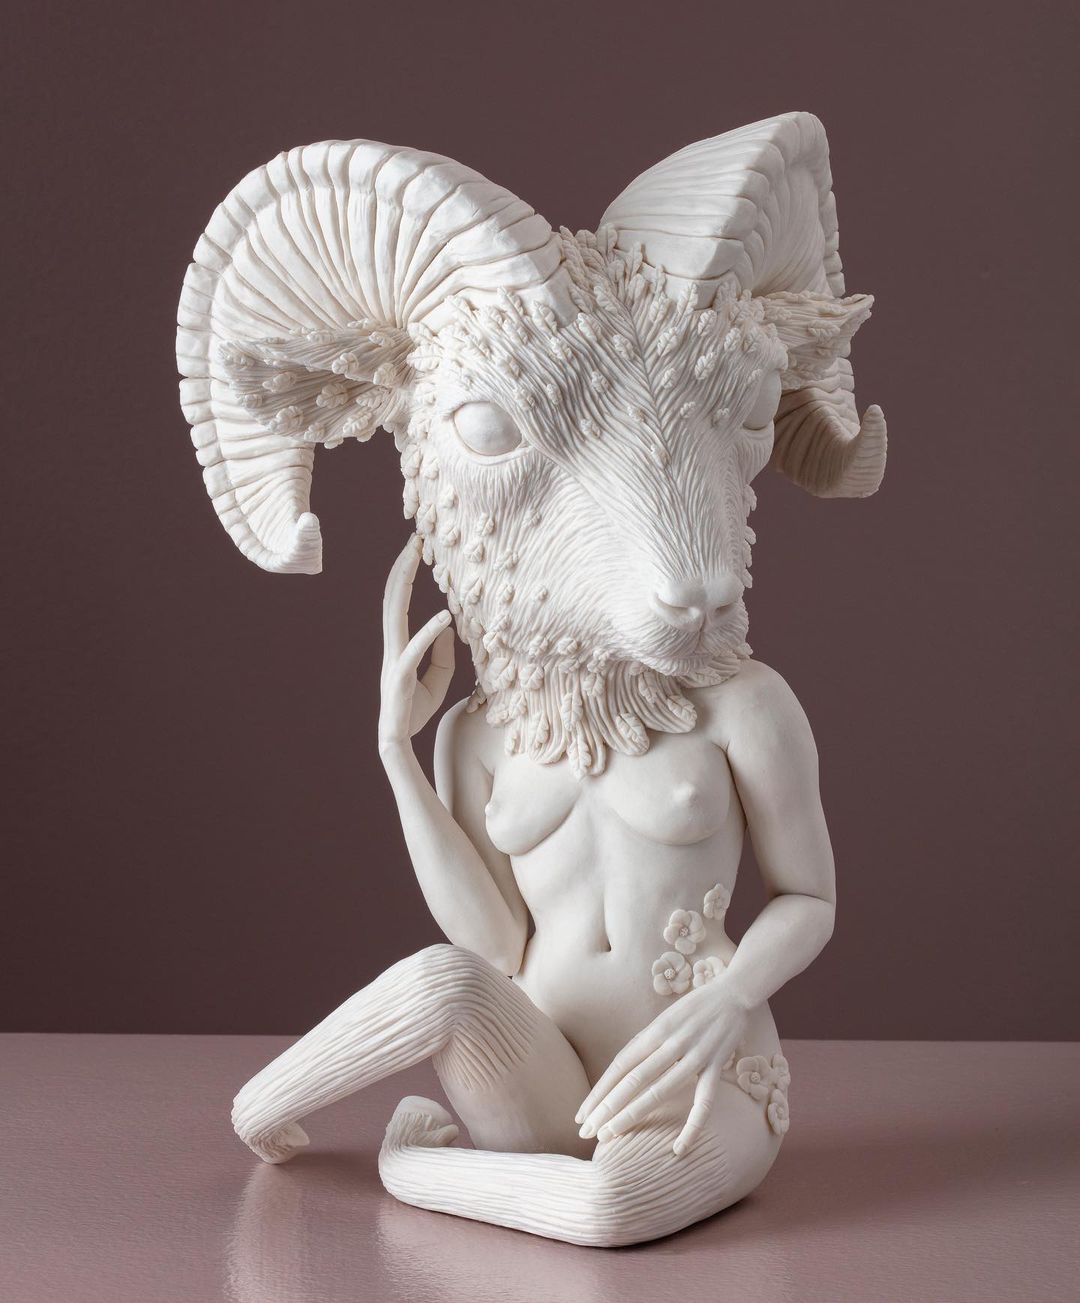 Fabulous Sculptures Of Human Animal Hybrids By Crystal Morey 13